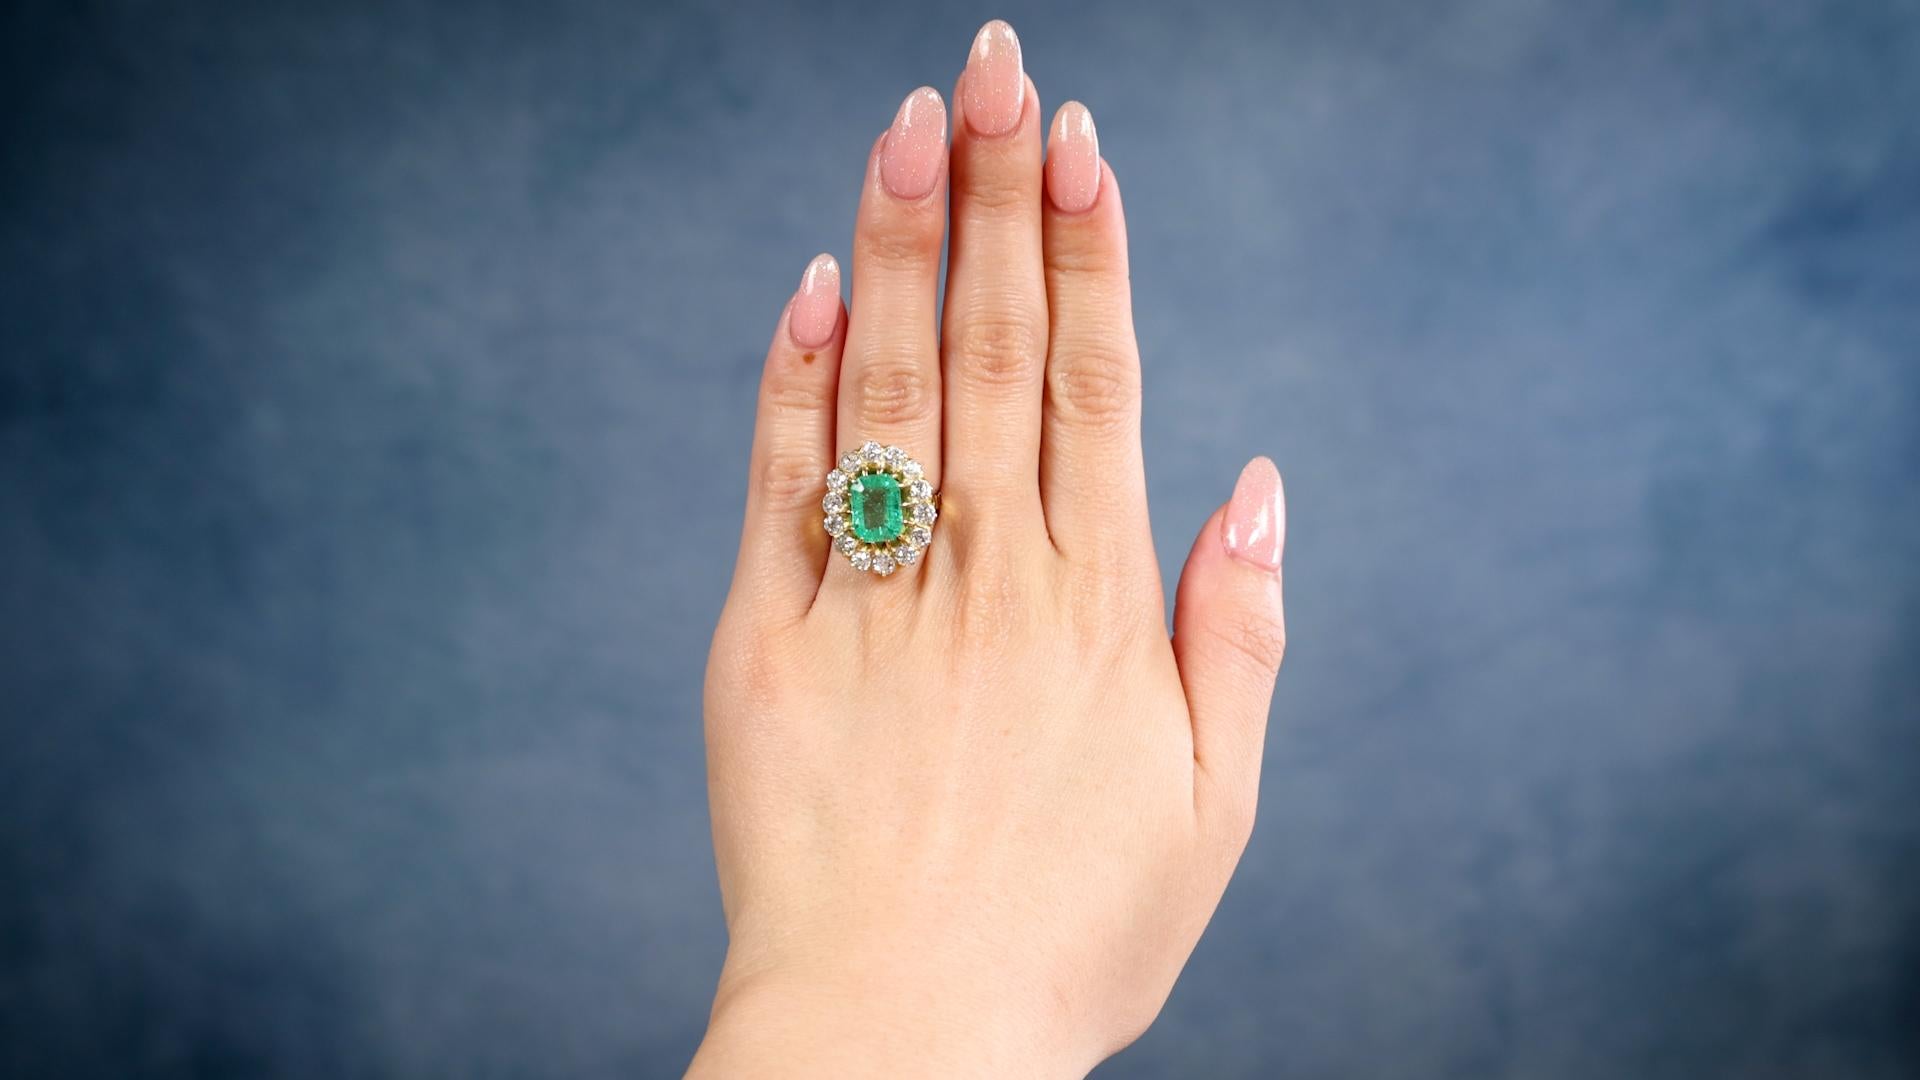 One Victorian Revival GIA 2.50 Carat Colombian Emerald Diamond 18k Yellow Gold Cluster Ring. Featuring one octagonal step cut emerald weighing approximately 2.50 carats, accompanied by GIA #6237177988 stating the emerald is of Colombian origin.